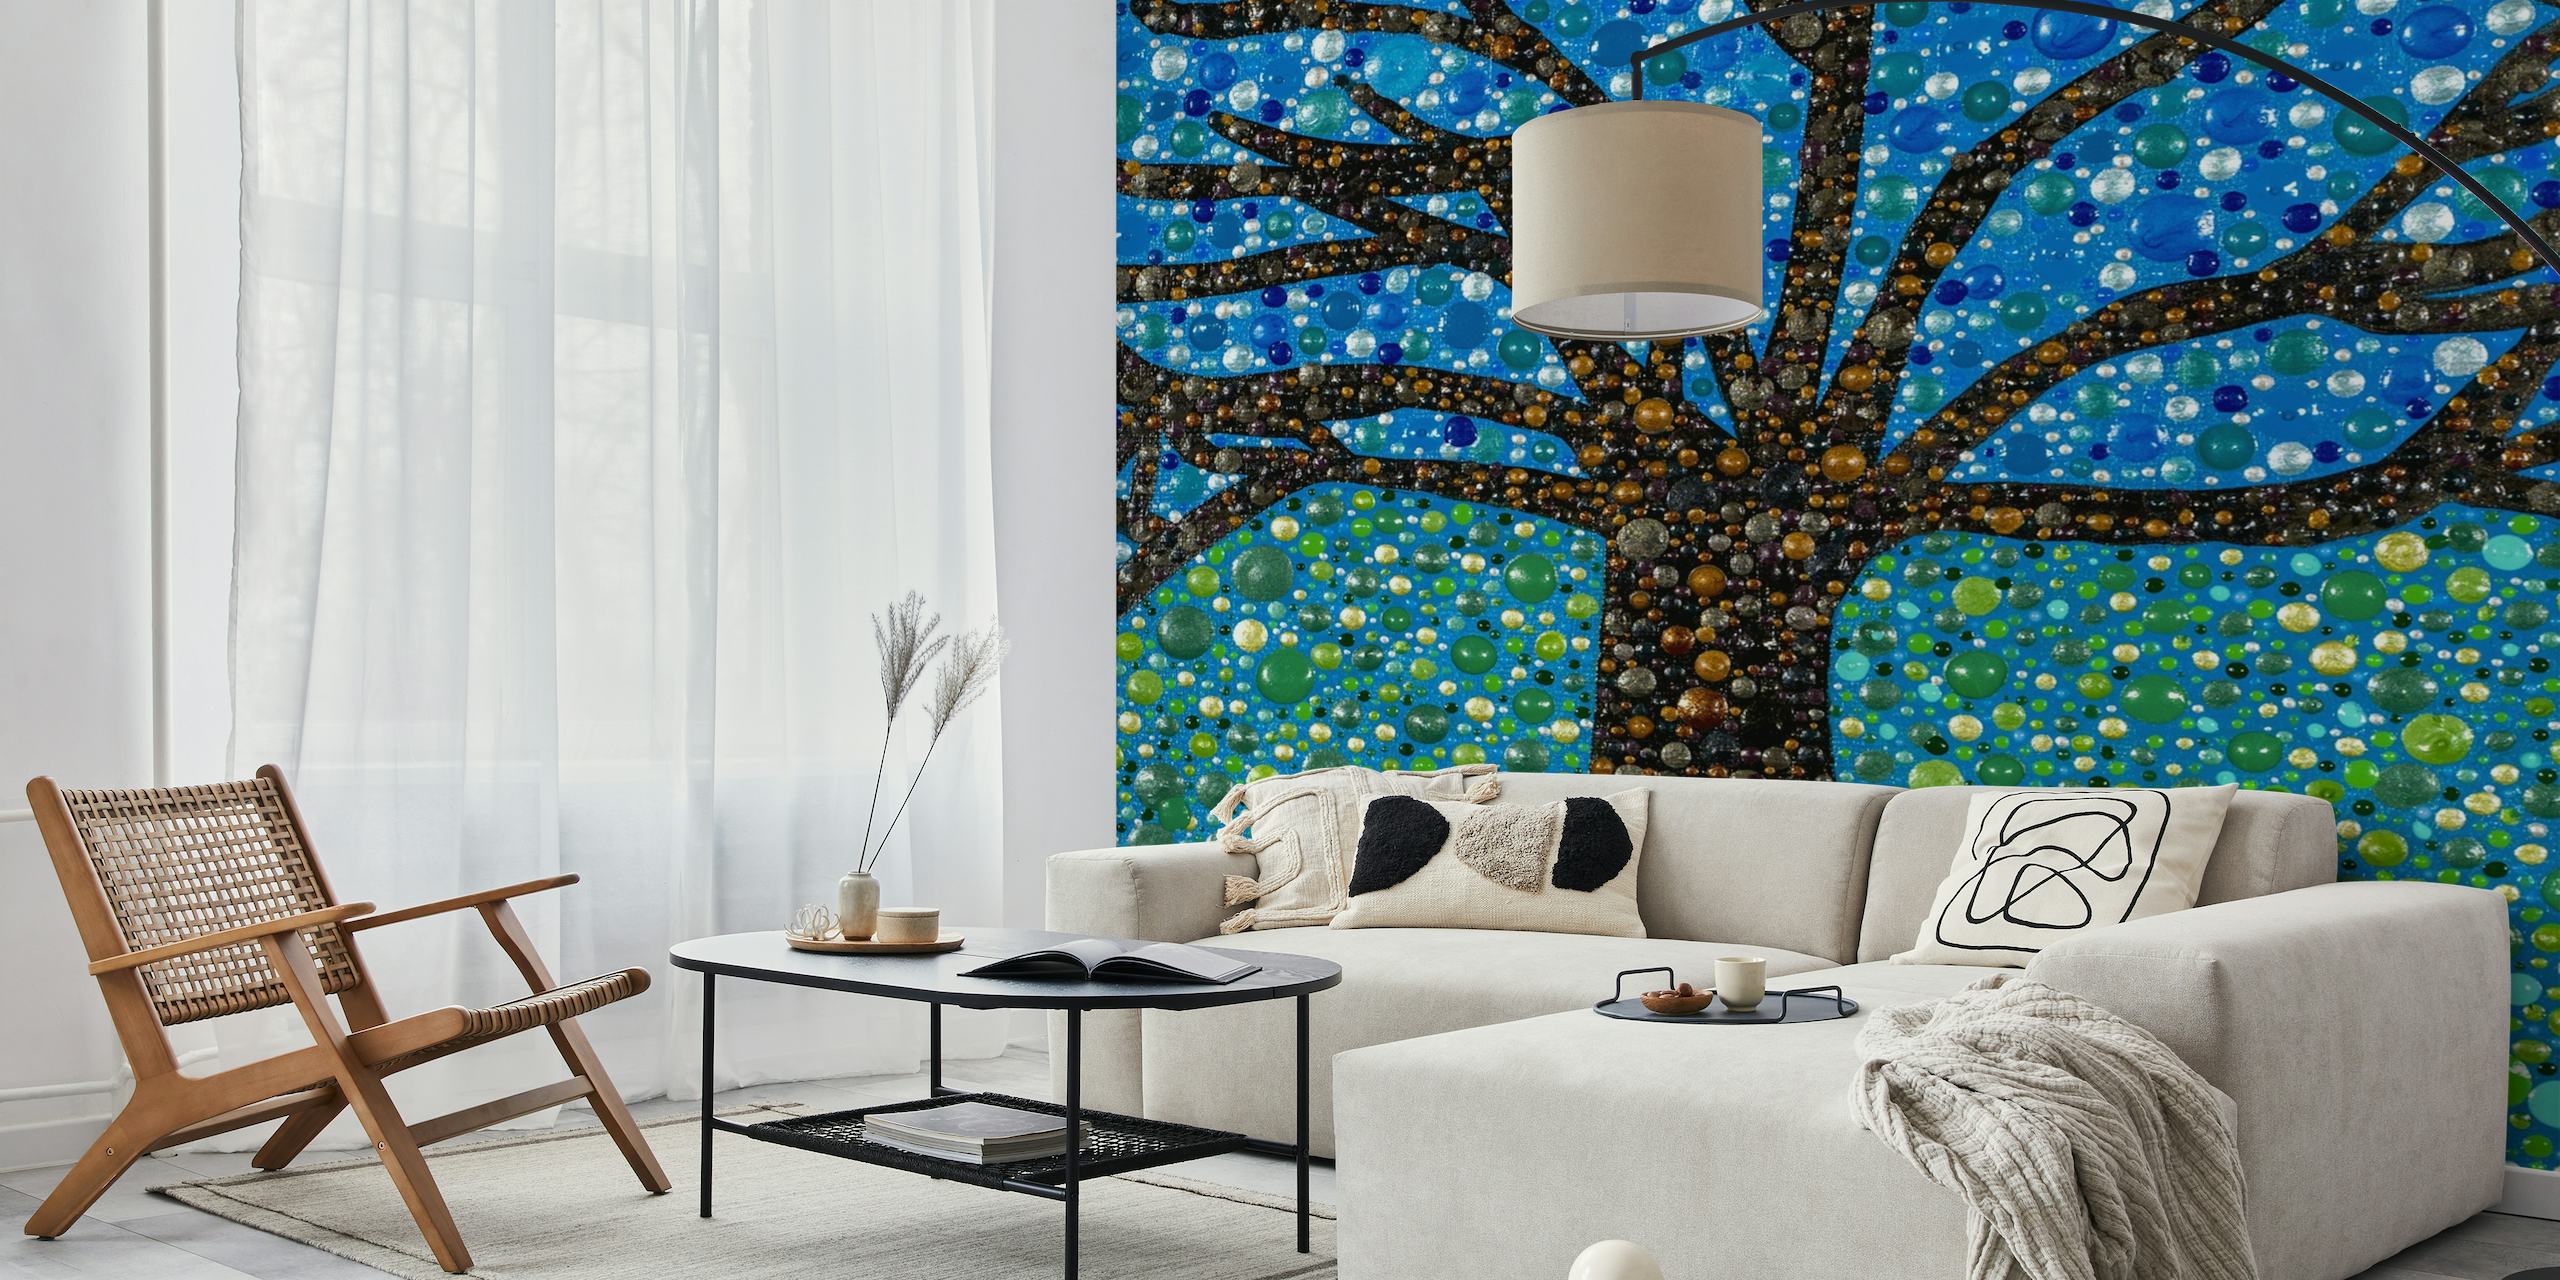 Artistic 'Path of Life' wall mural with a central tree motif and pebble designs